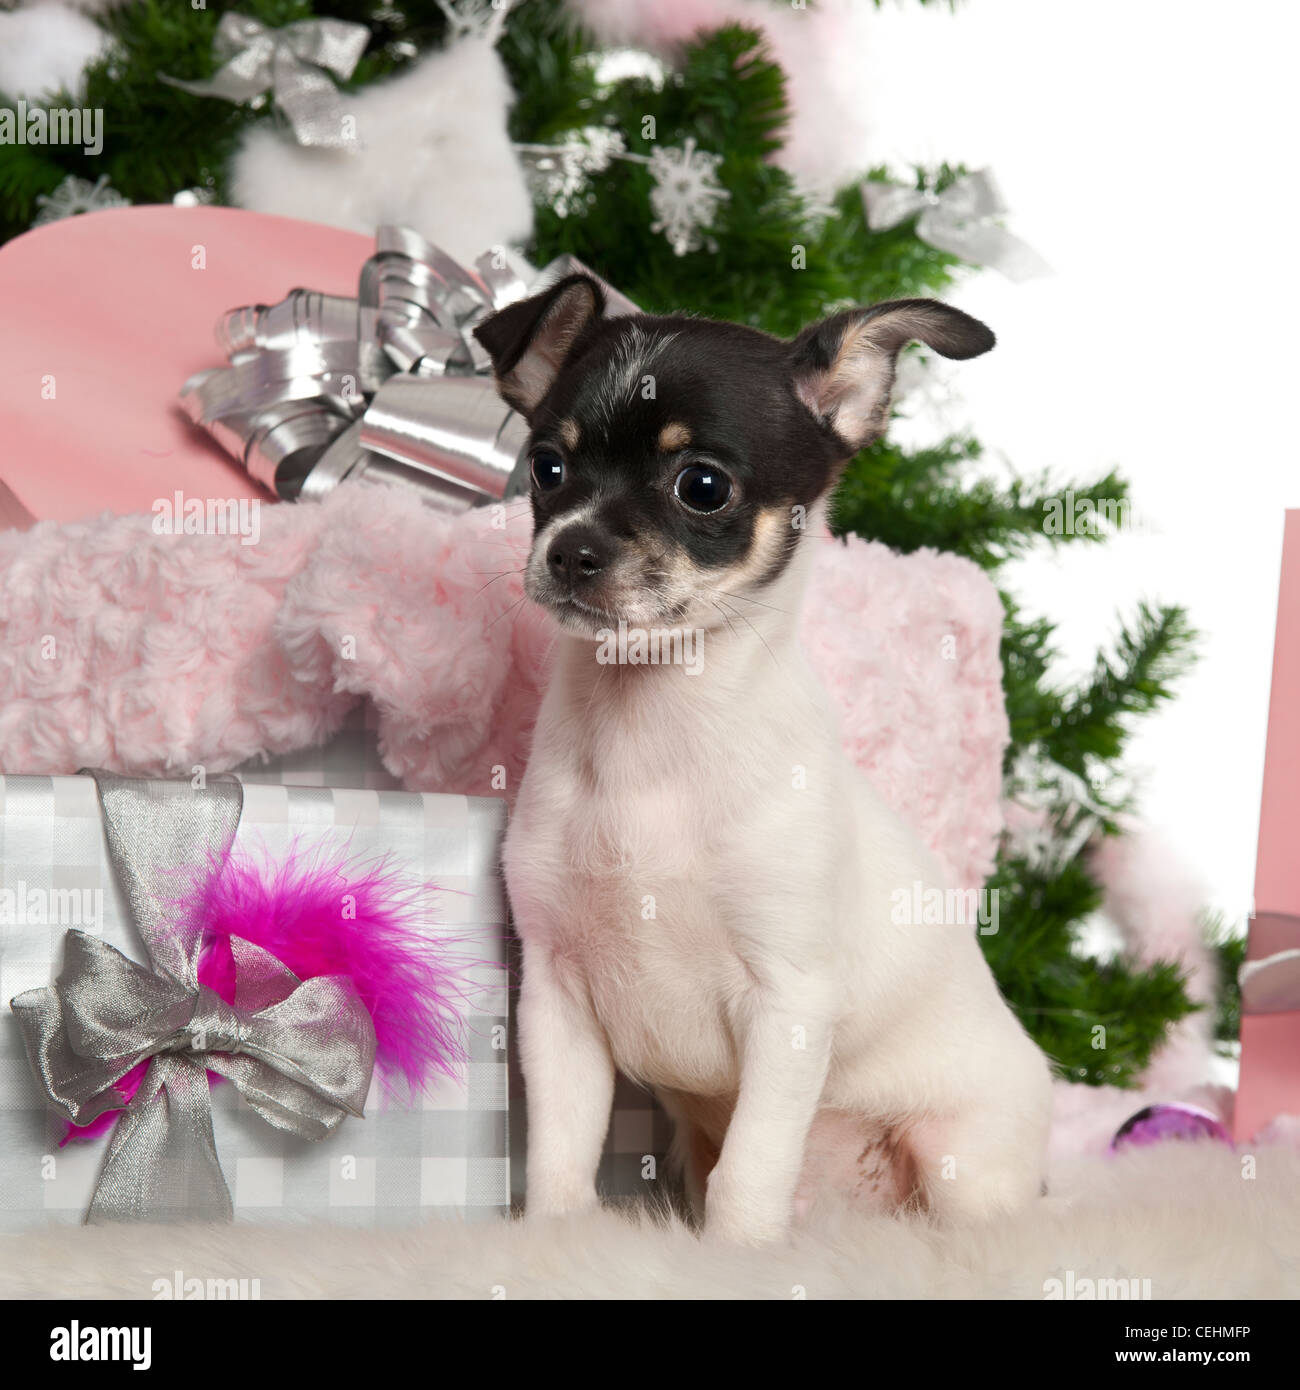 Chihuahua puppy, 3 months old, sitting with Christmas tree and gifts against white background Stock Photo